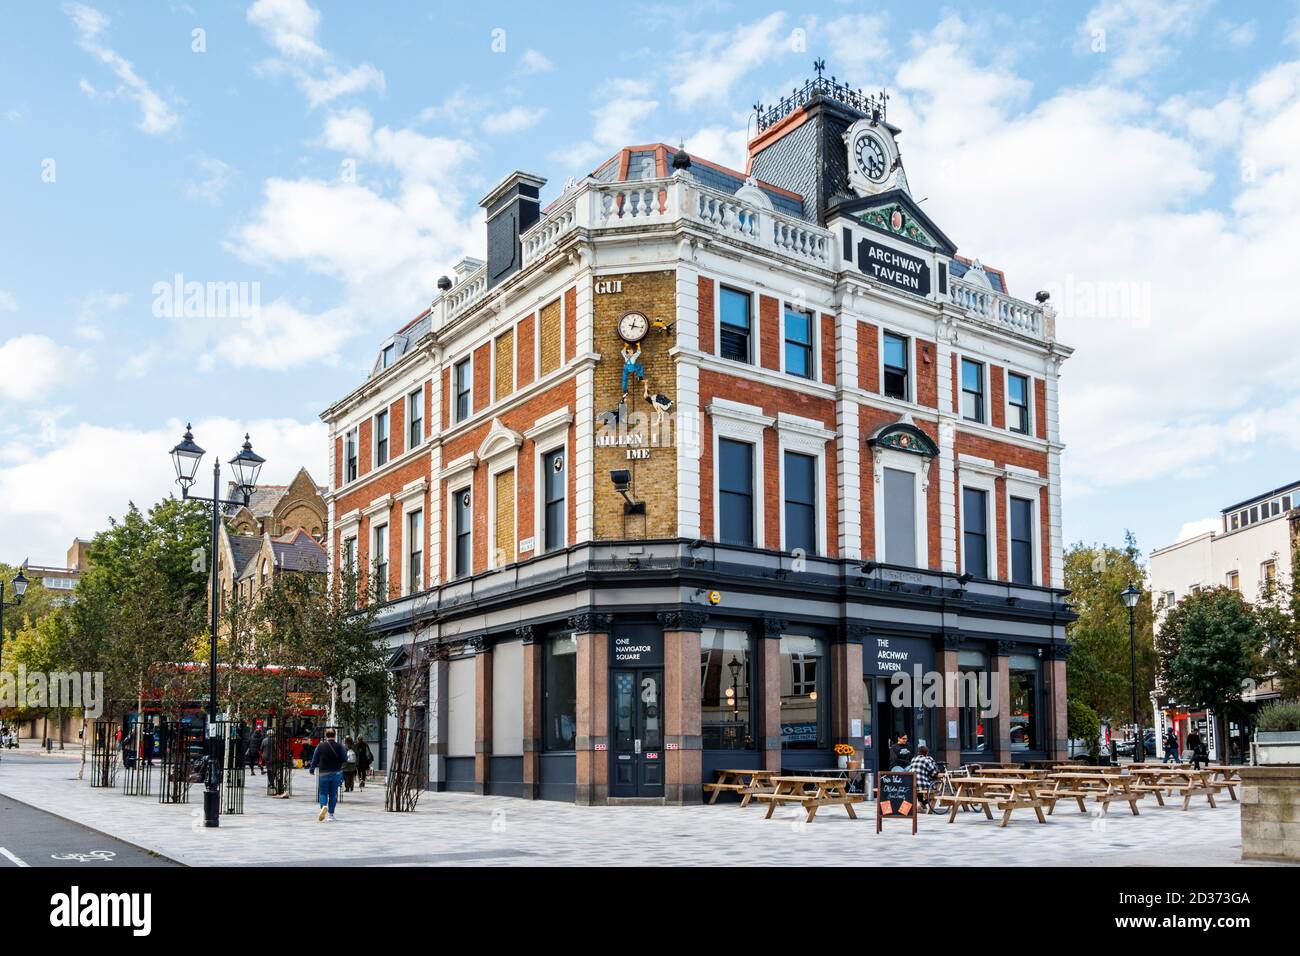 The Archway Tavern, a landmark pub in Islington, reopened after a long period of closure, London, UK Stock Photo